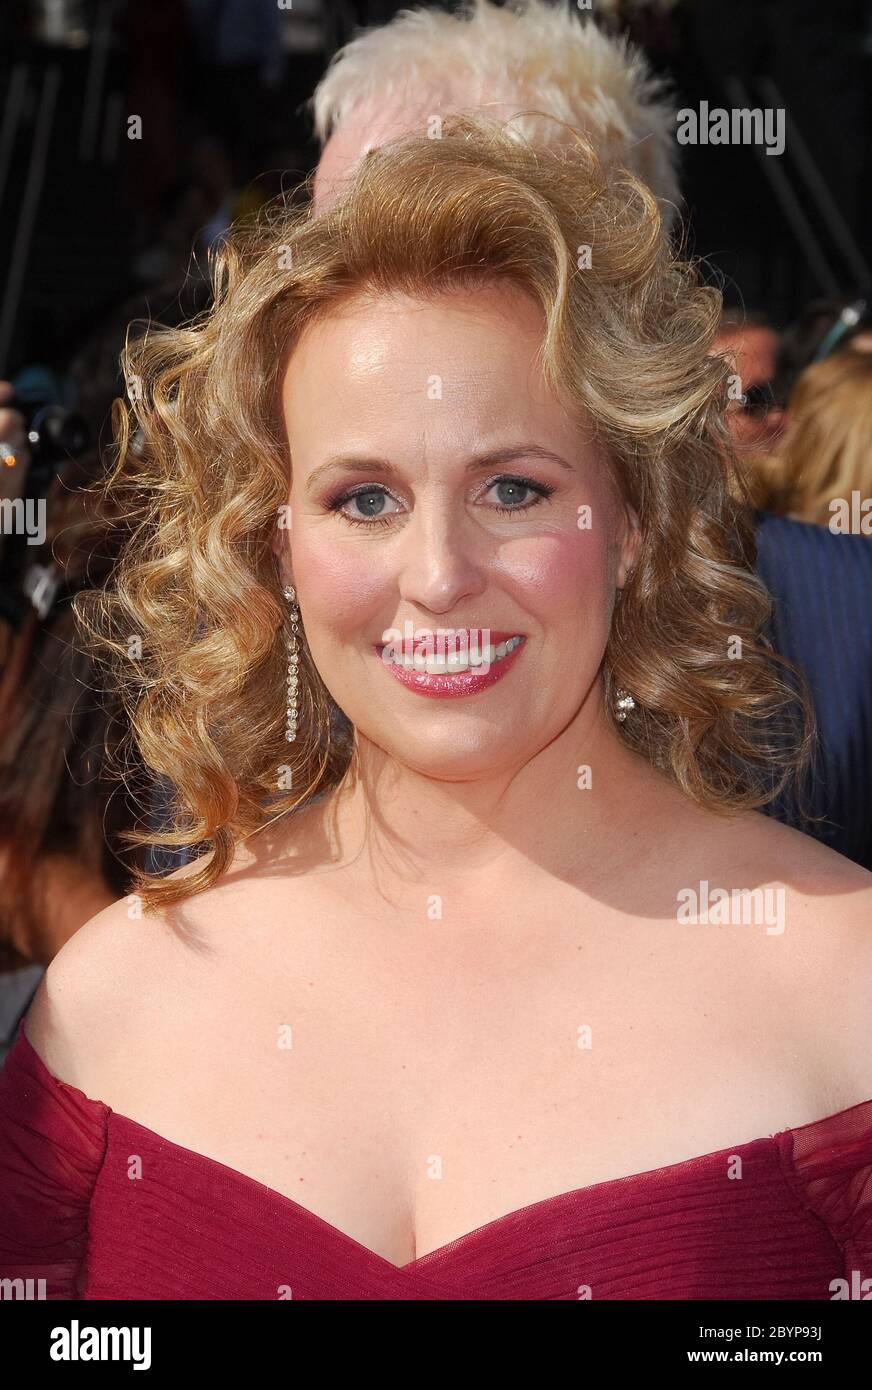 Genie Francis at the 34th Annual Daytime Emmy Awards - Arrivals held at the Kodak Theatre in Hollywood, CA. The event took place on Friday, June 15, 2007. Photo by: SBM / PictureLux - File Reference # 34006-5930SBMPLX Stock Photo